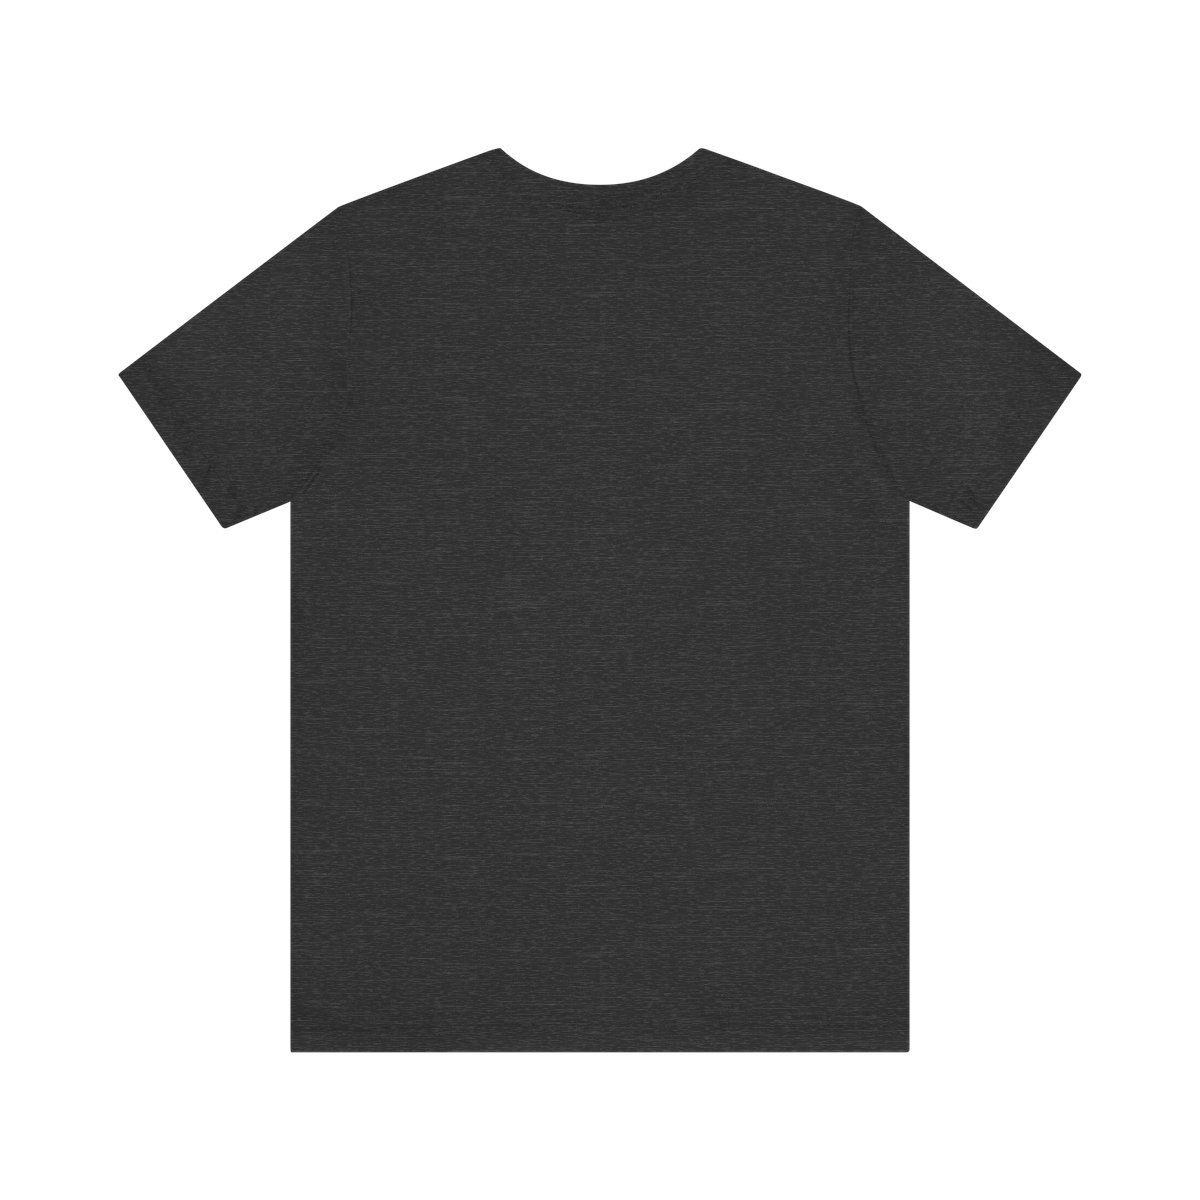 A Good Day For Justice Unisex Jersey Short Sleeve Tee product thumbnail image